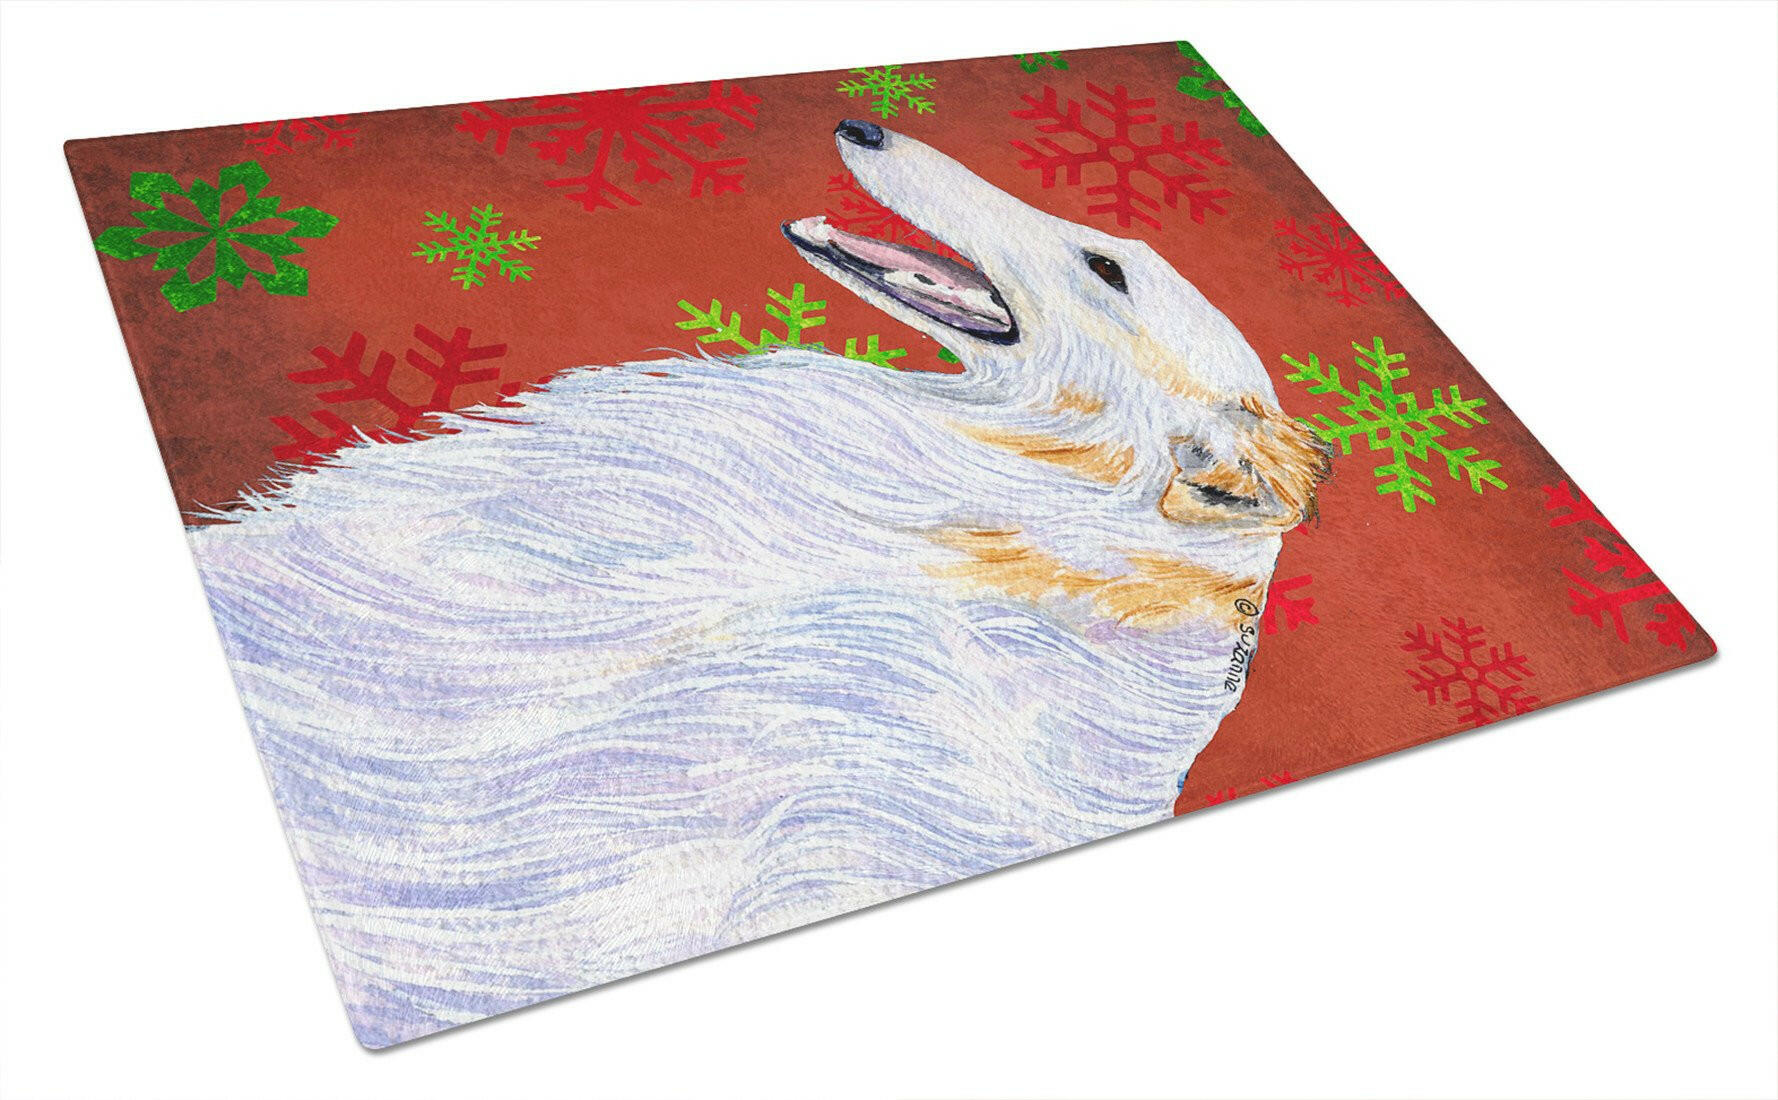 Borzoi Red and Green Snowflakes Holiday Christmas Glass Cutting Board Large by Caroline's Treasures